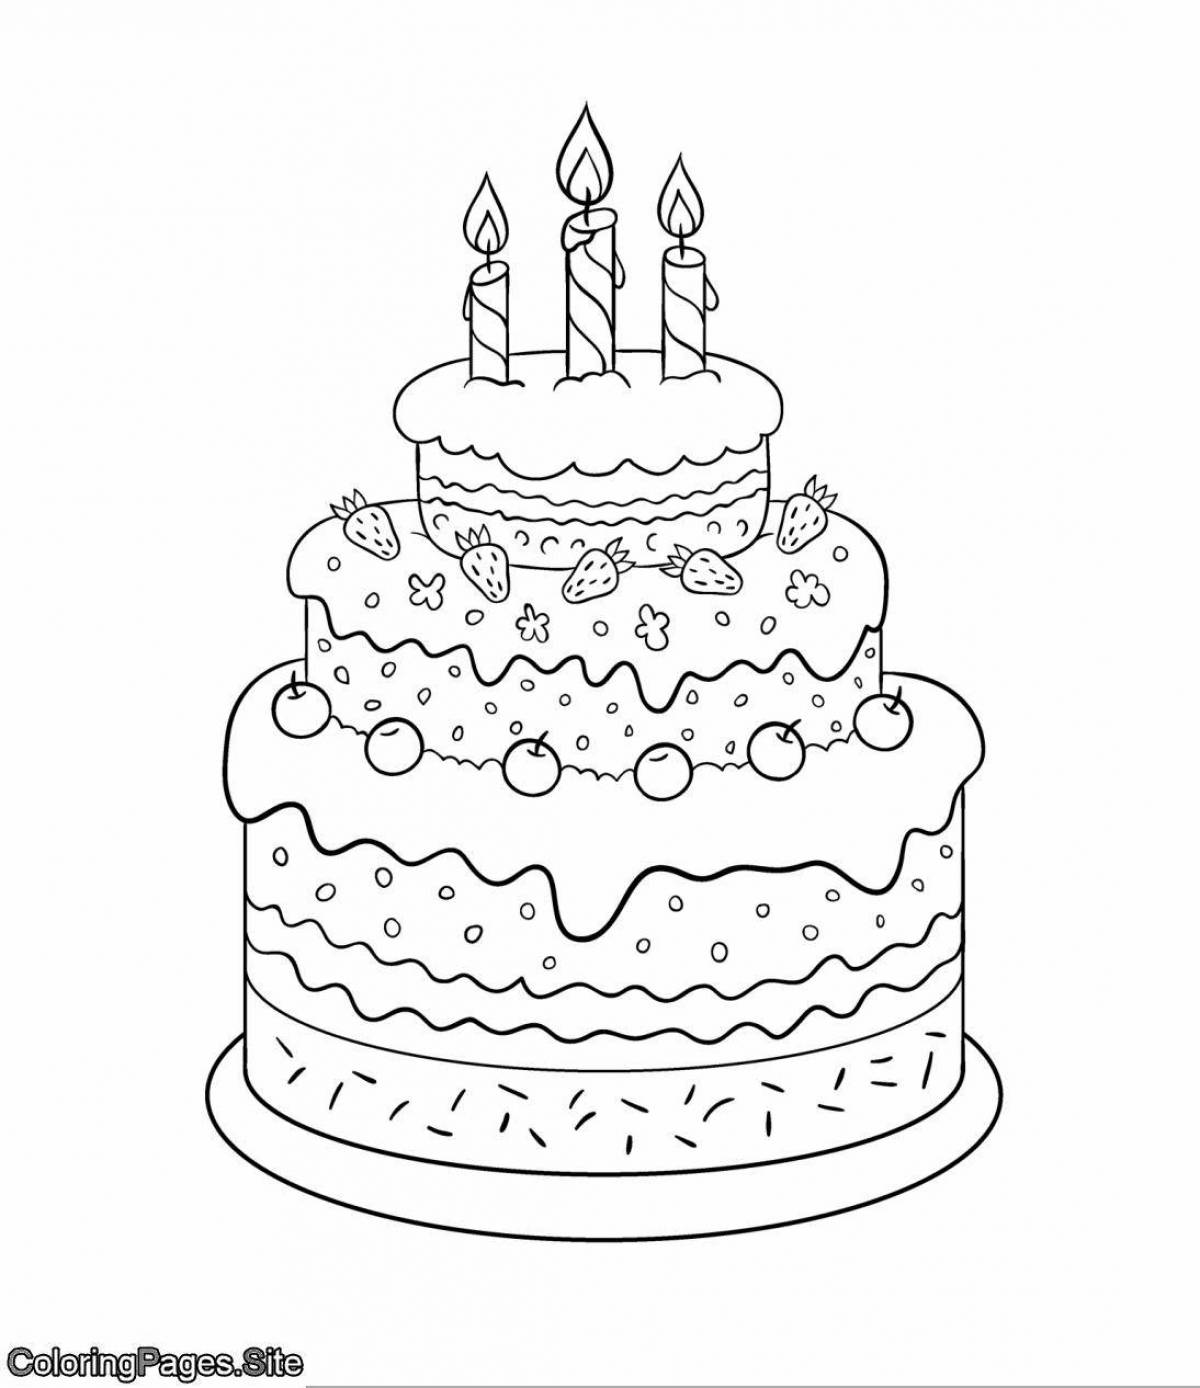 Amazing birthday cake coloring page